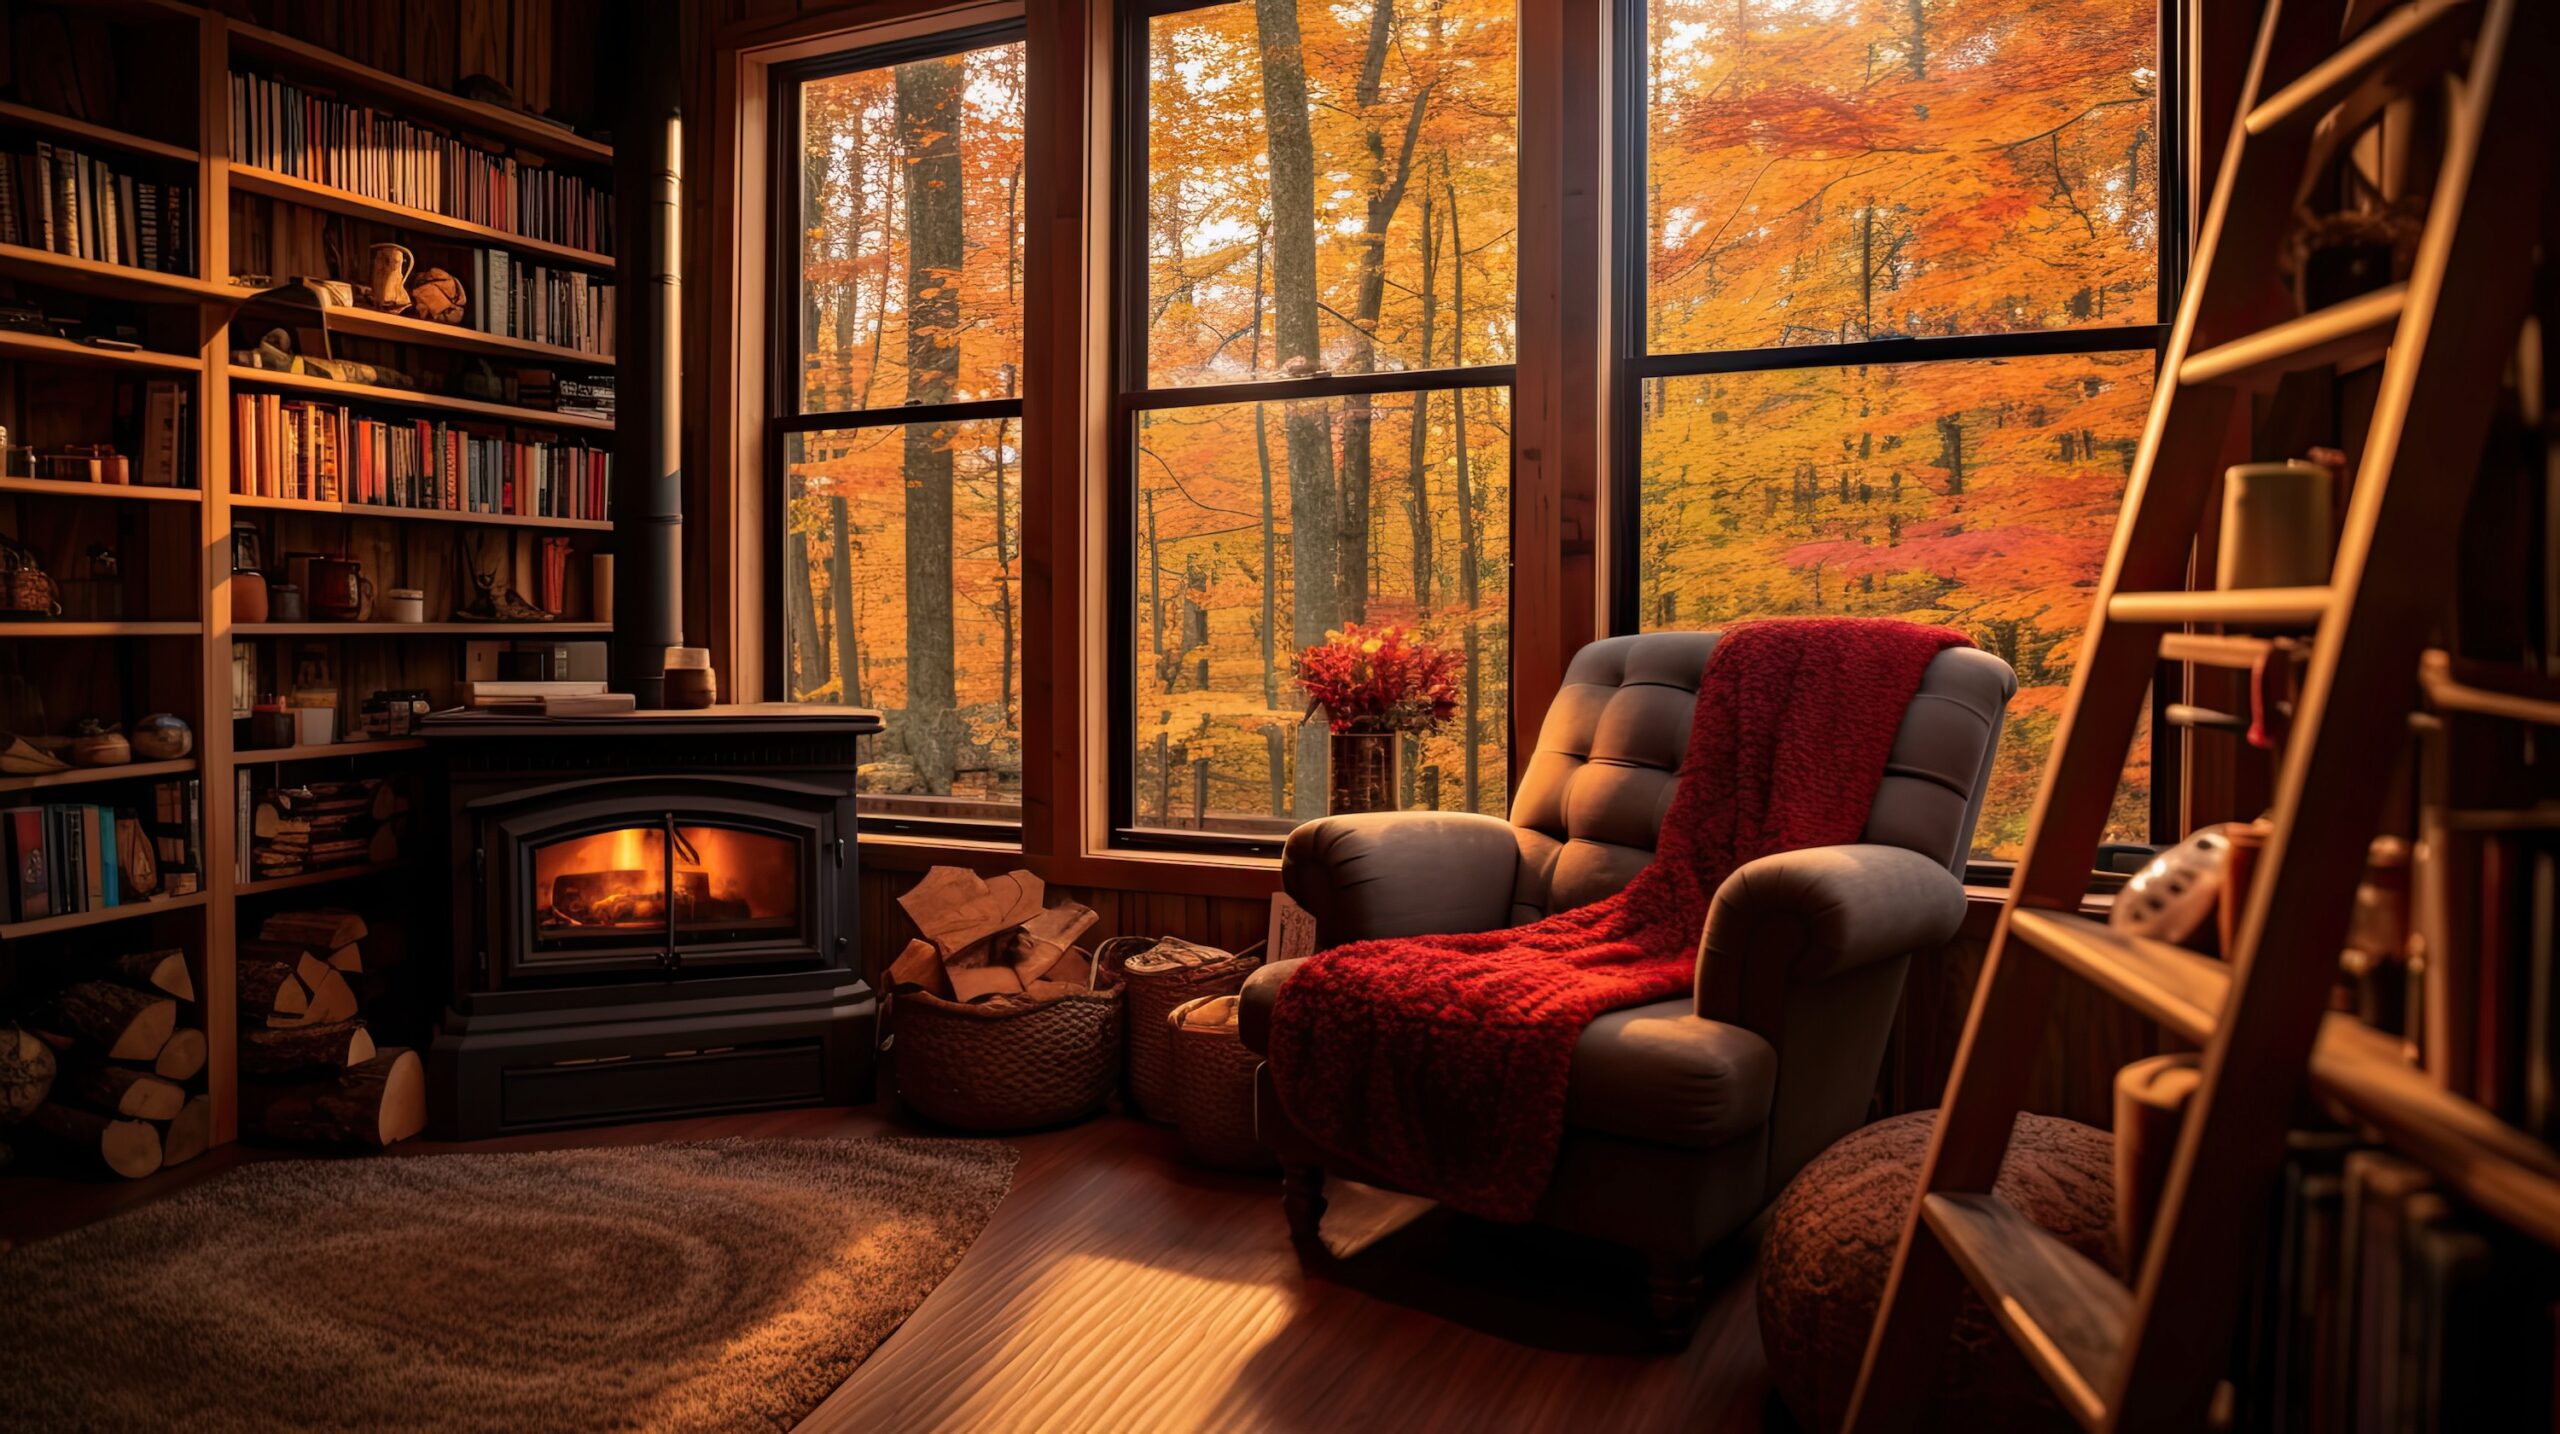 Home Downsizing. Image of a cozy room and fireplace, overlooking a backyard forest with autumn leaves and trees. Autumn also a intimating time for change.